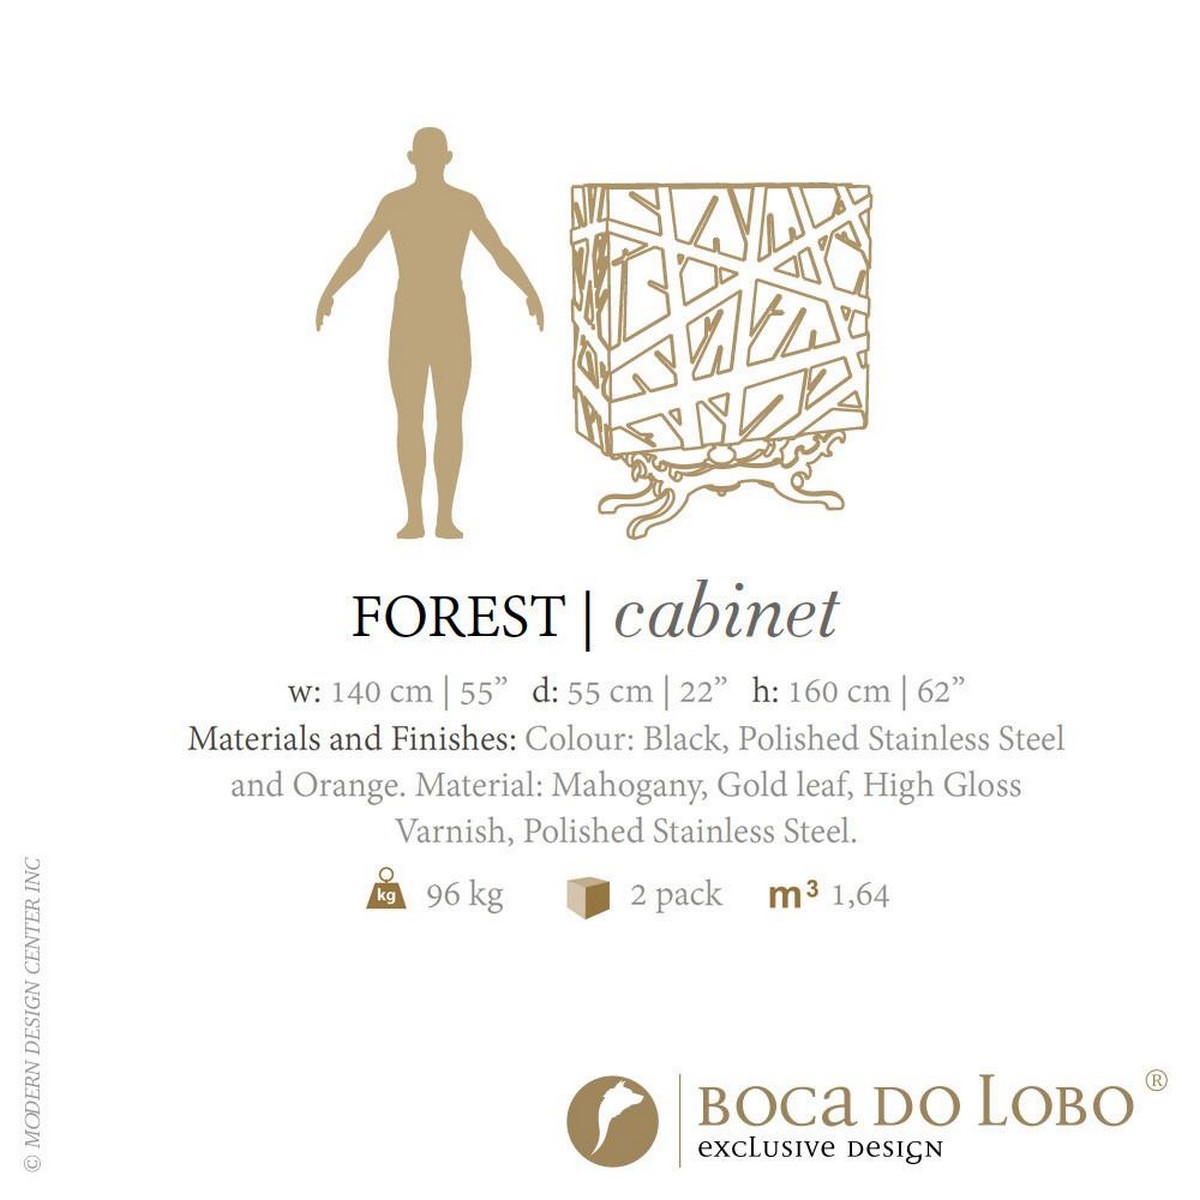 Chaos And Order: Forest By Boca Do Lobo